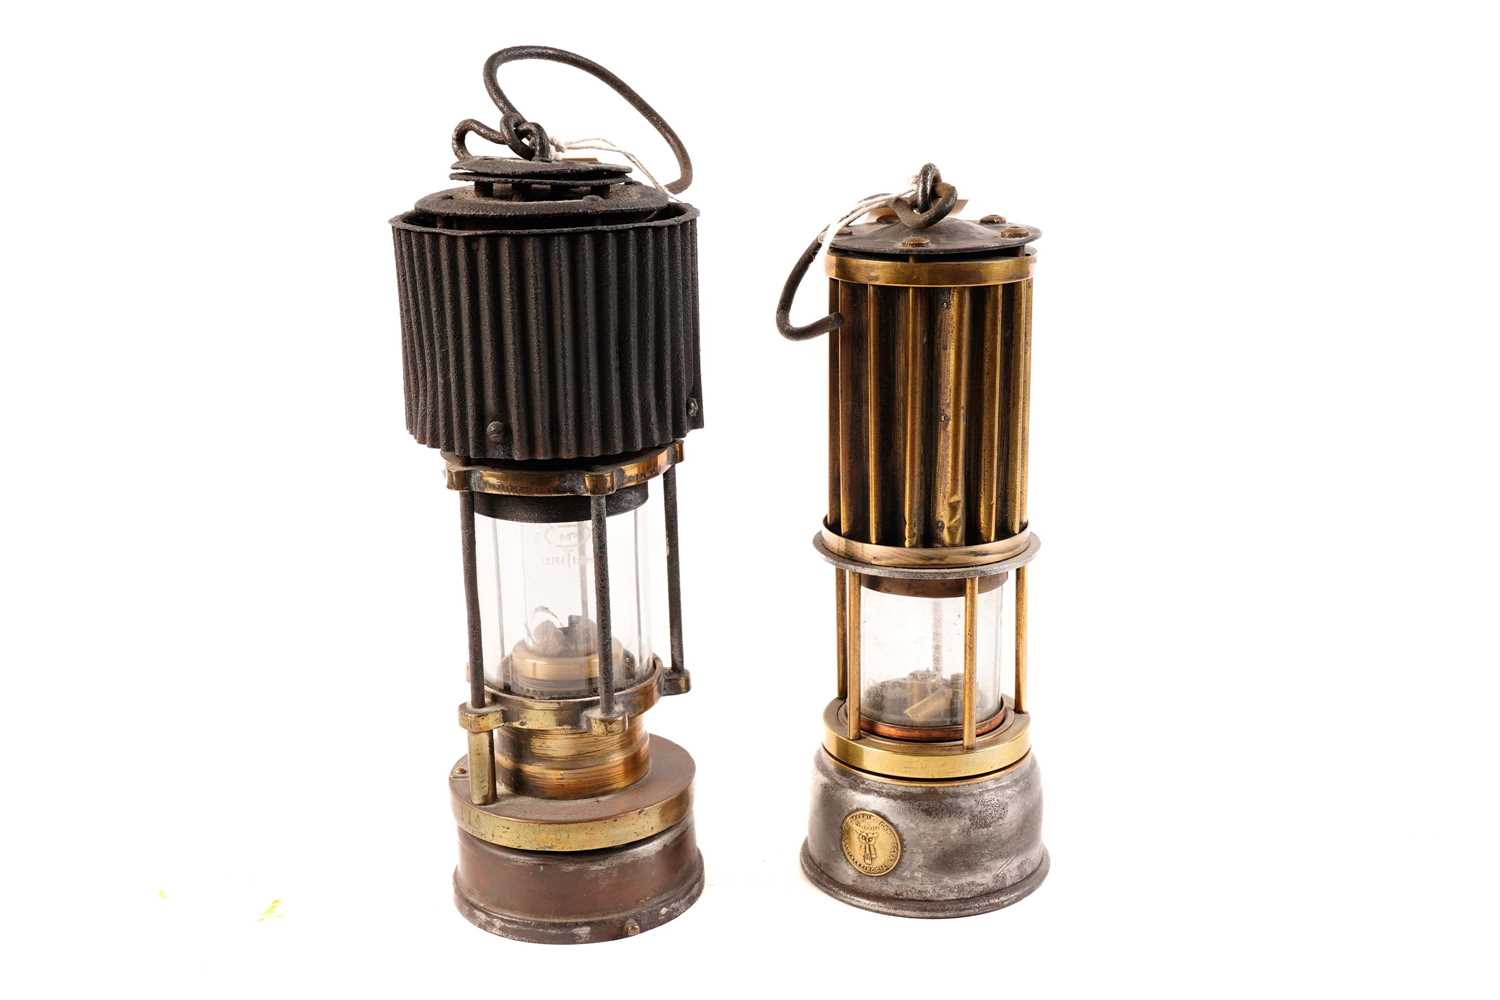 Two miners safety lamps